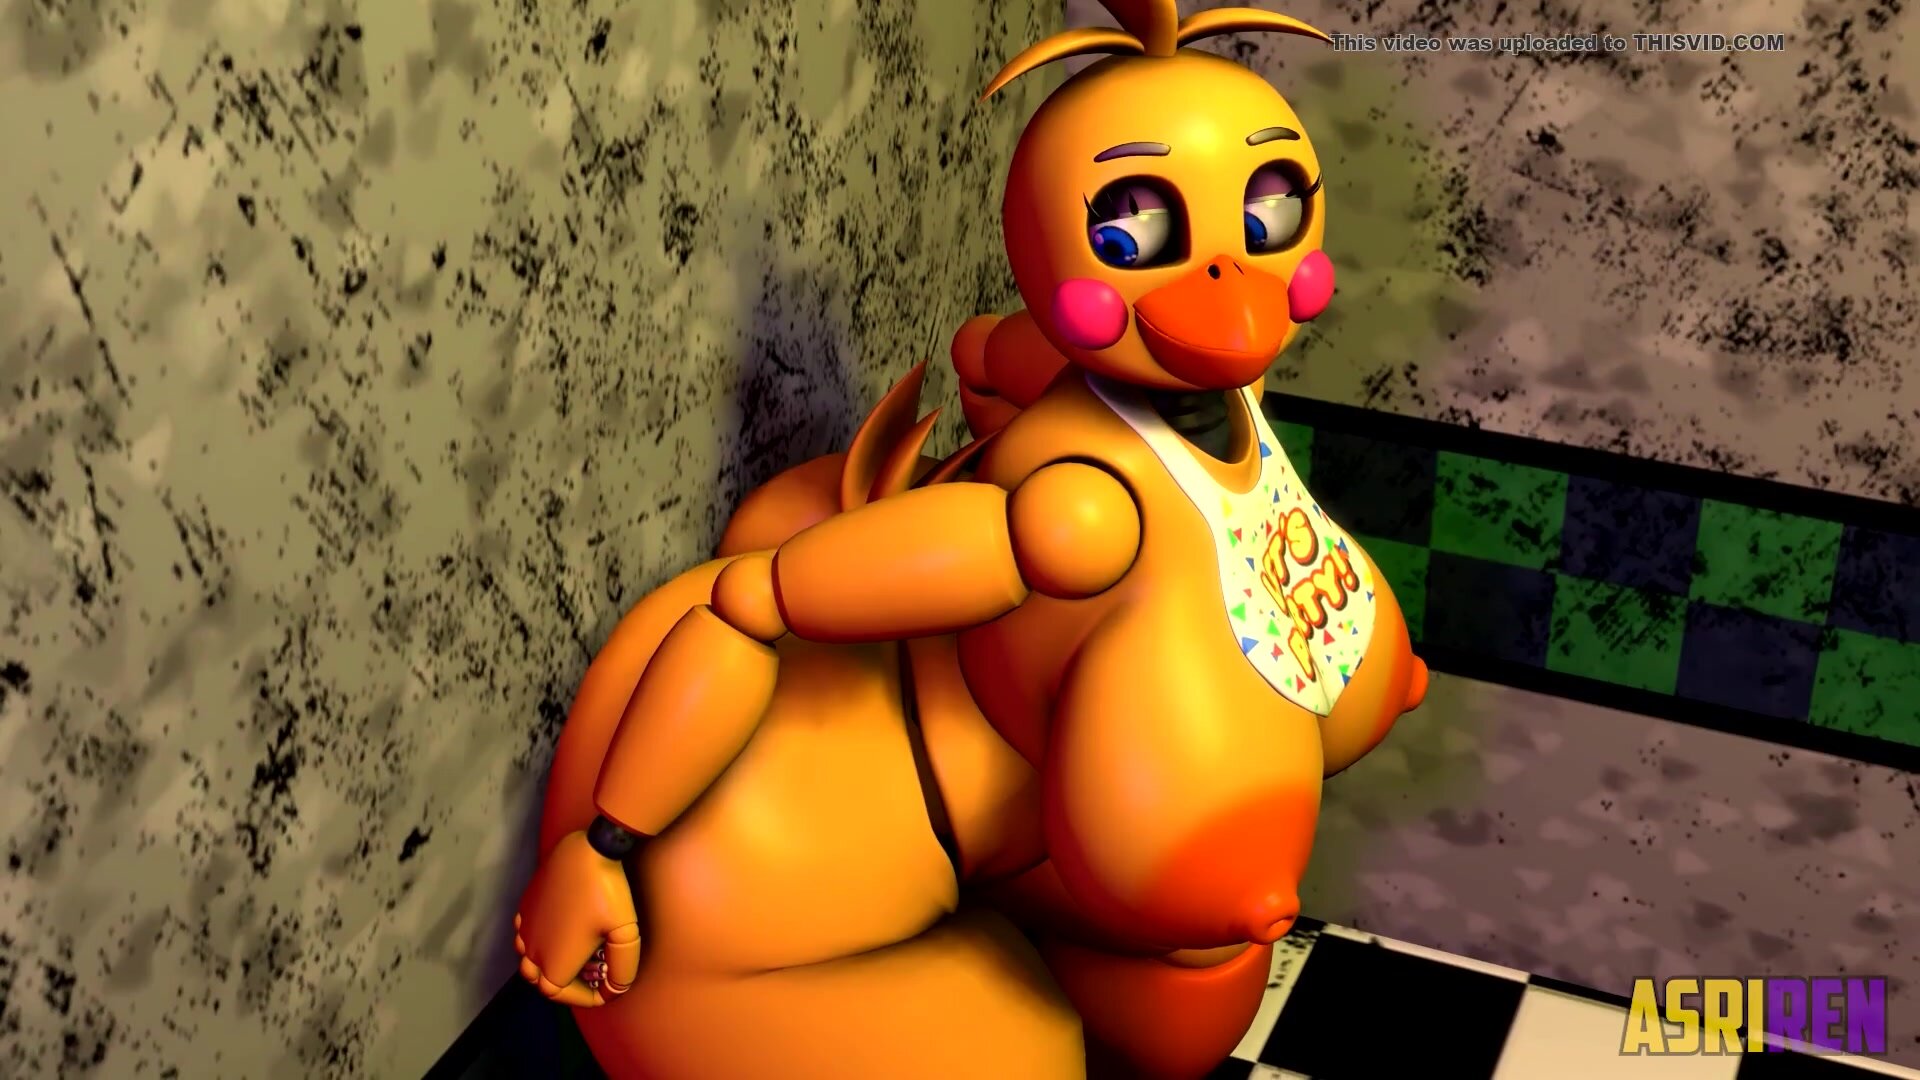 Toy Chica Fart Animation Video 2 ThisVidcom